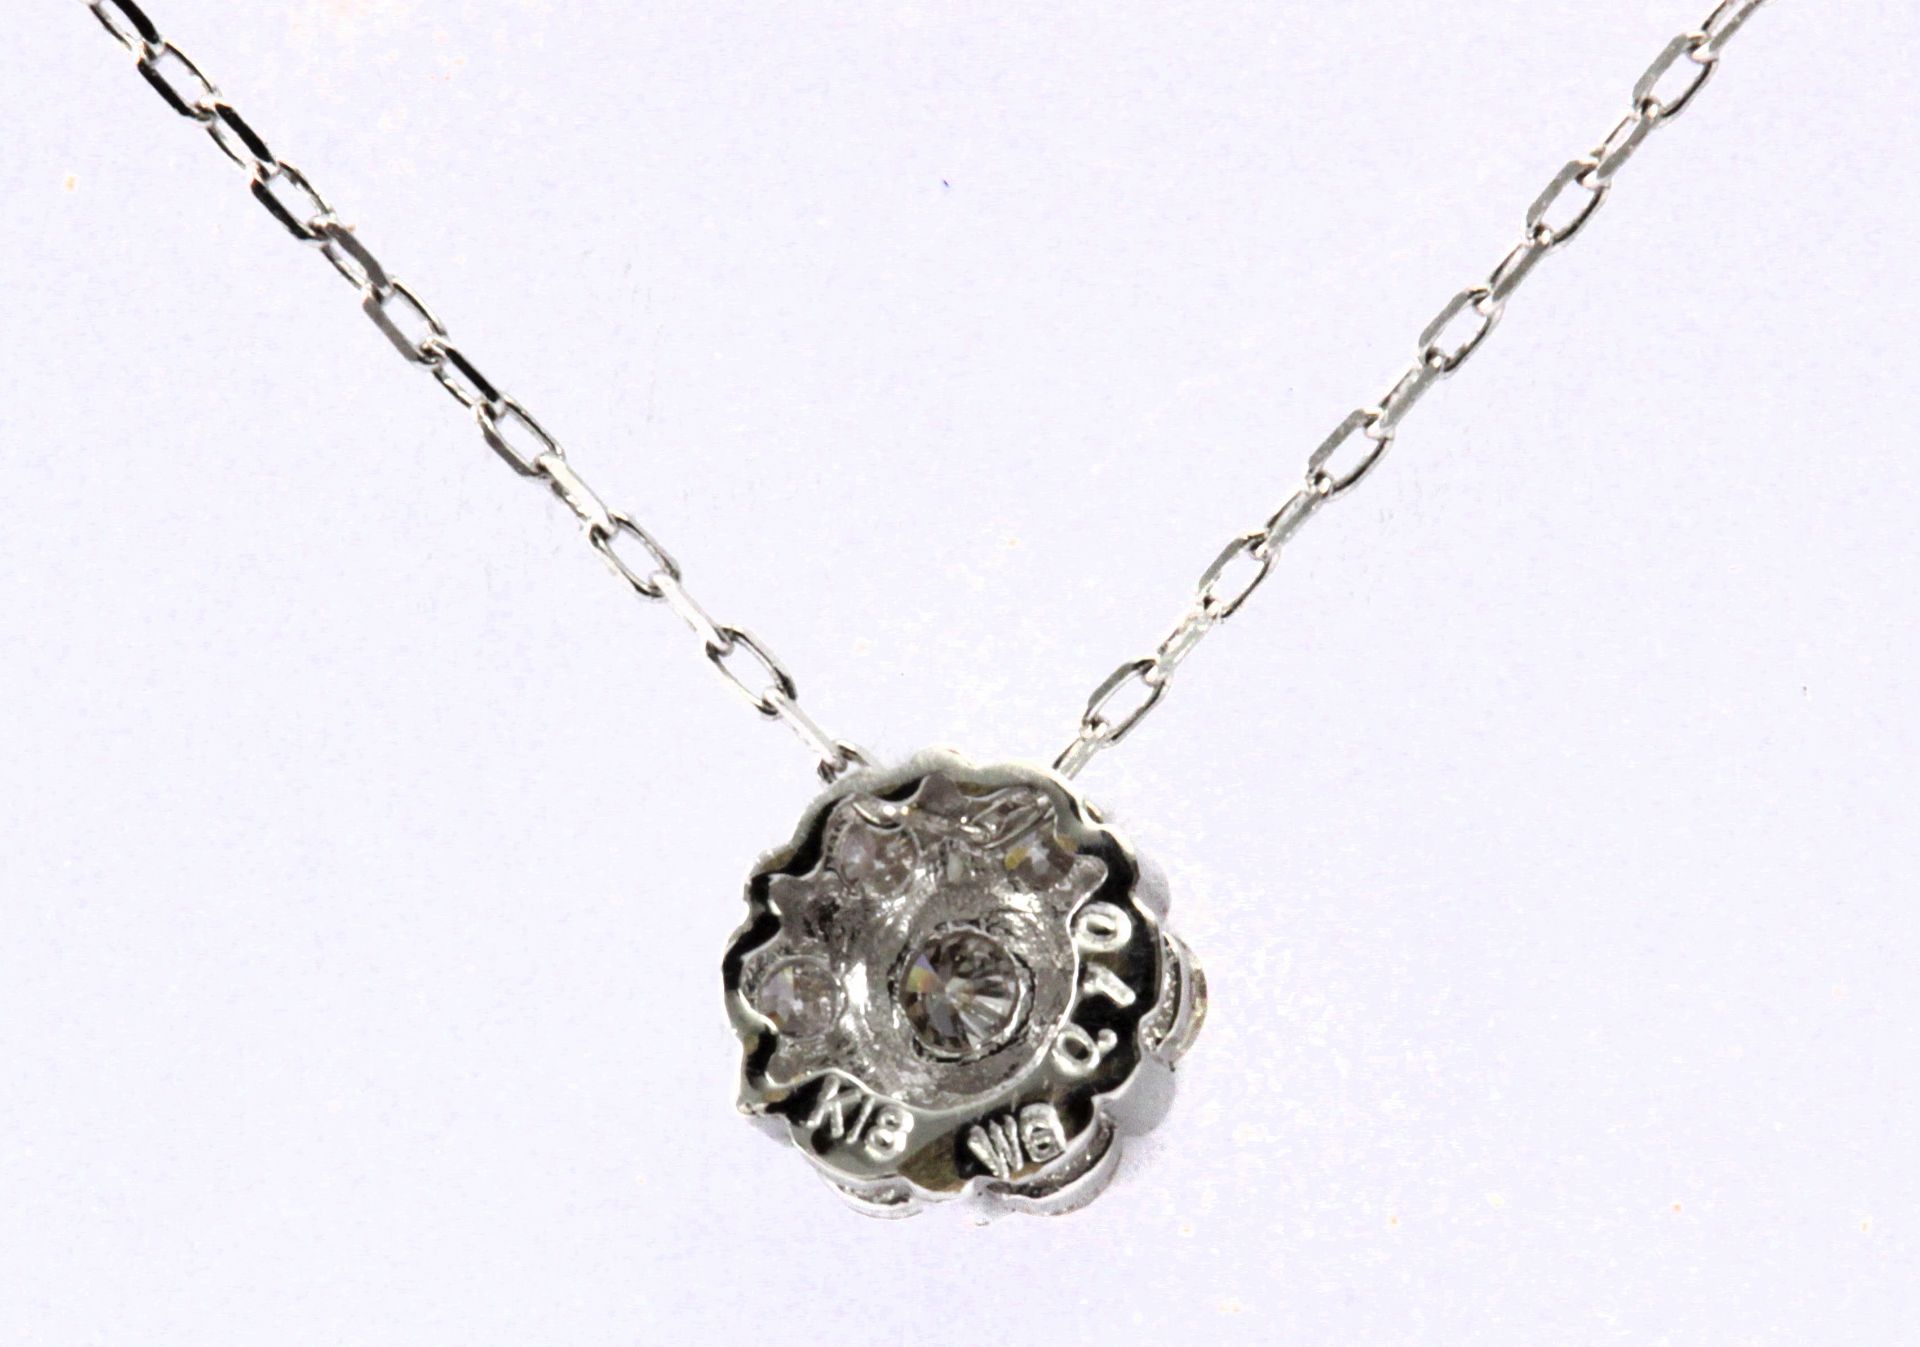 Diamond cluster pendant with an 18k white gold setting and chain - Image 2 of 2